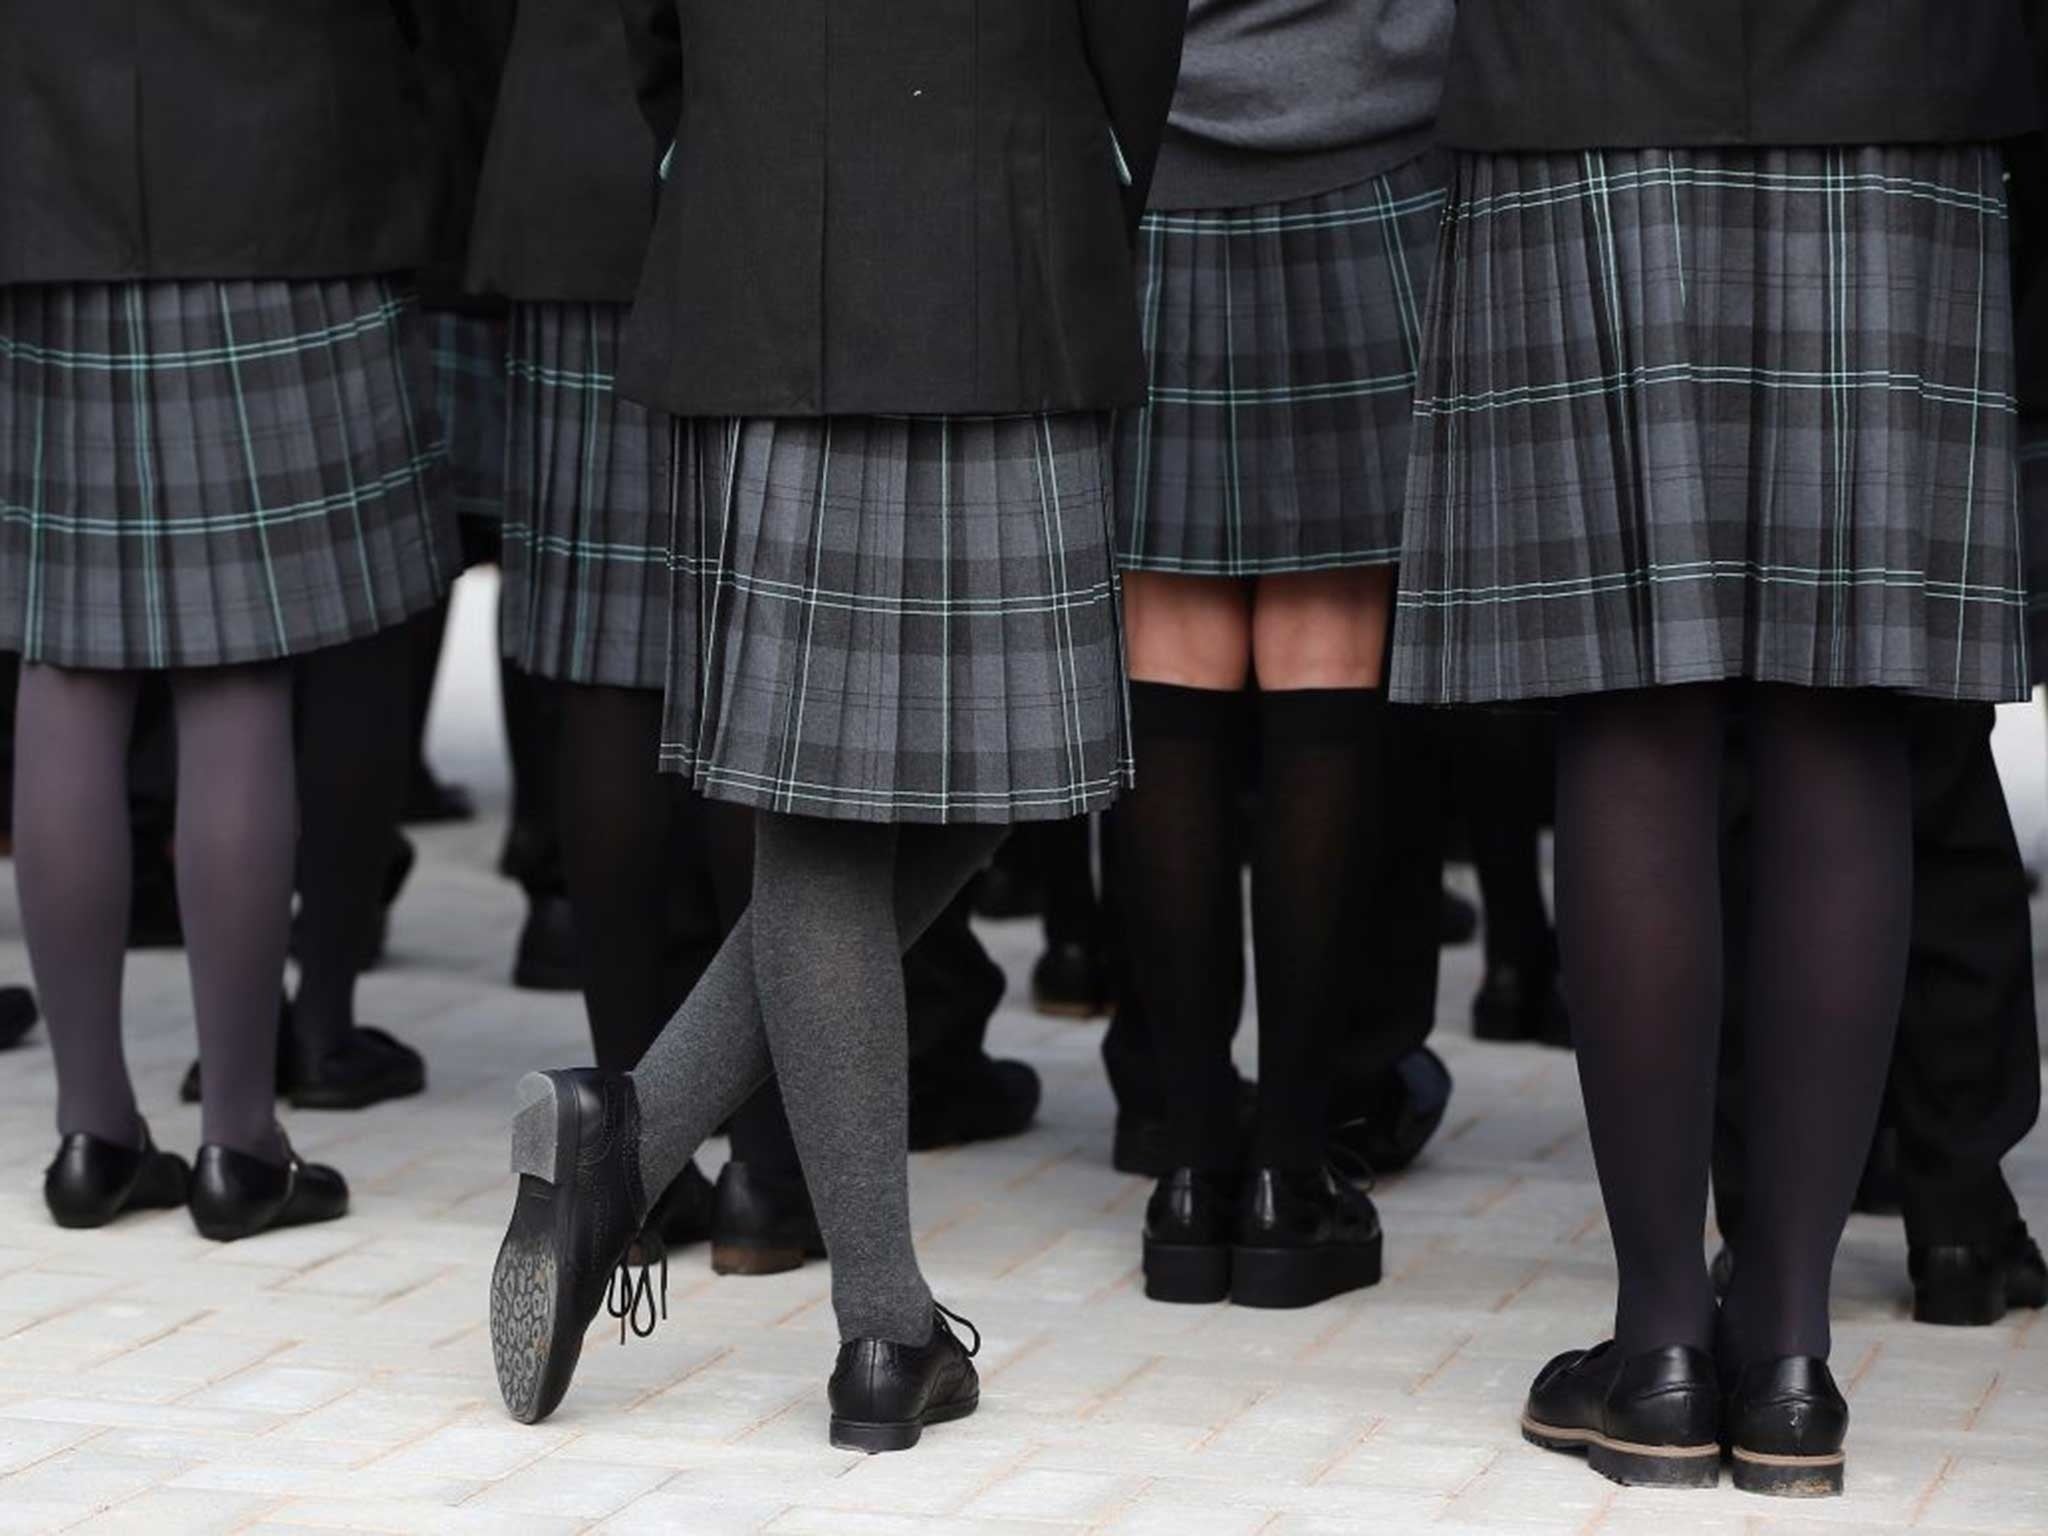 In School Porn - Pupils demand 'school uniforms' stop being sold in sex shops after wolf  whistles | The Independent